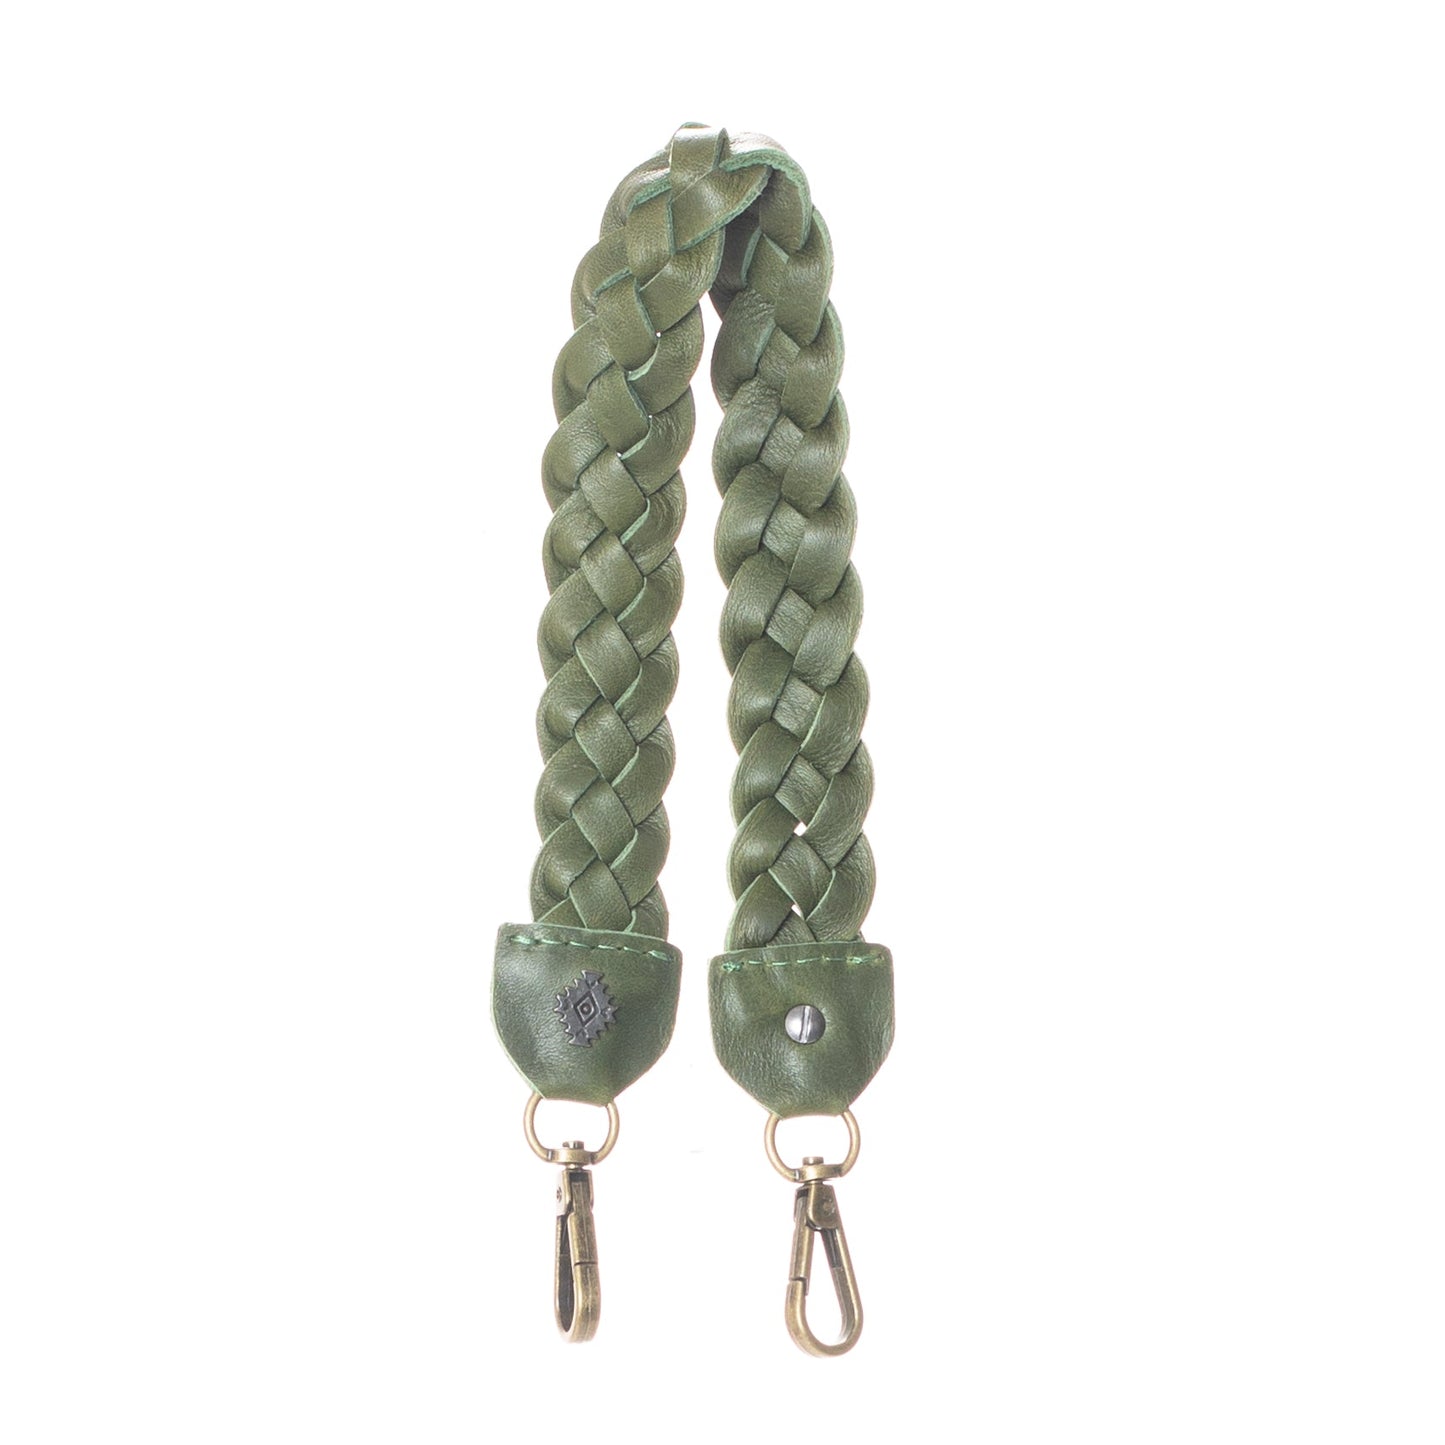 BRAIDED SHOULDER STRAP - ARTISAN COLLECTION - FULL LEATHER - DEEP EMERALD